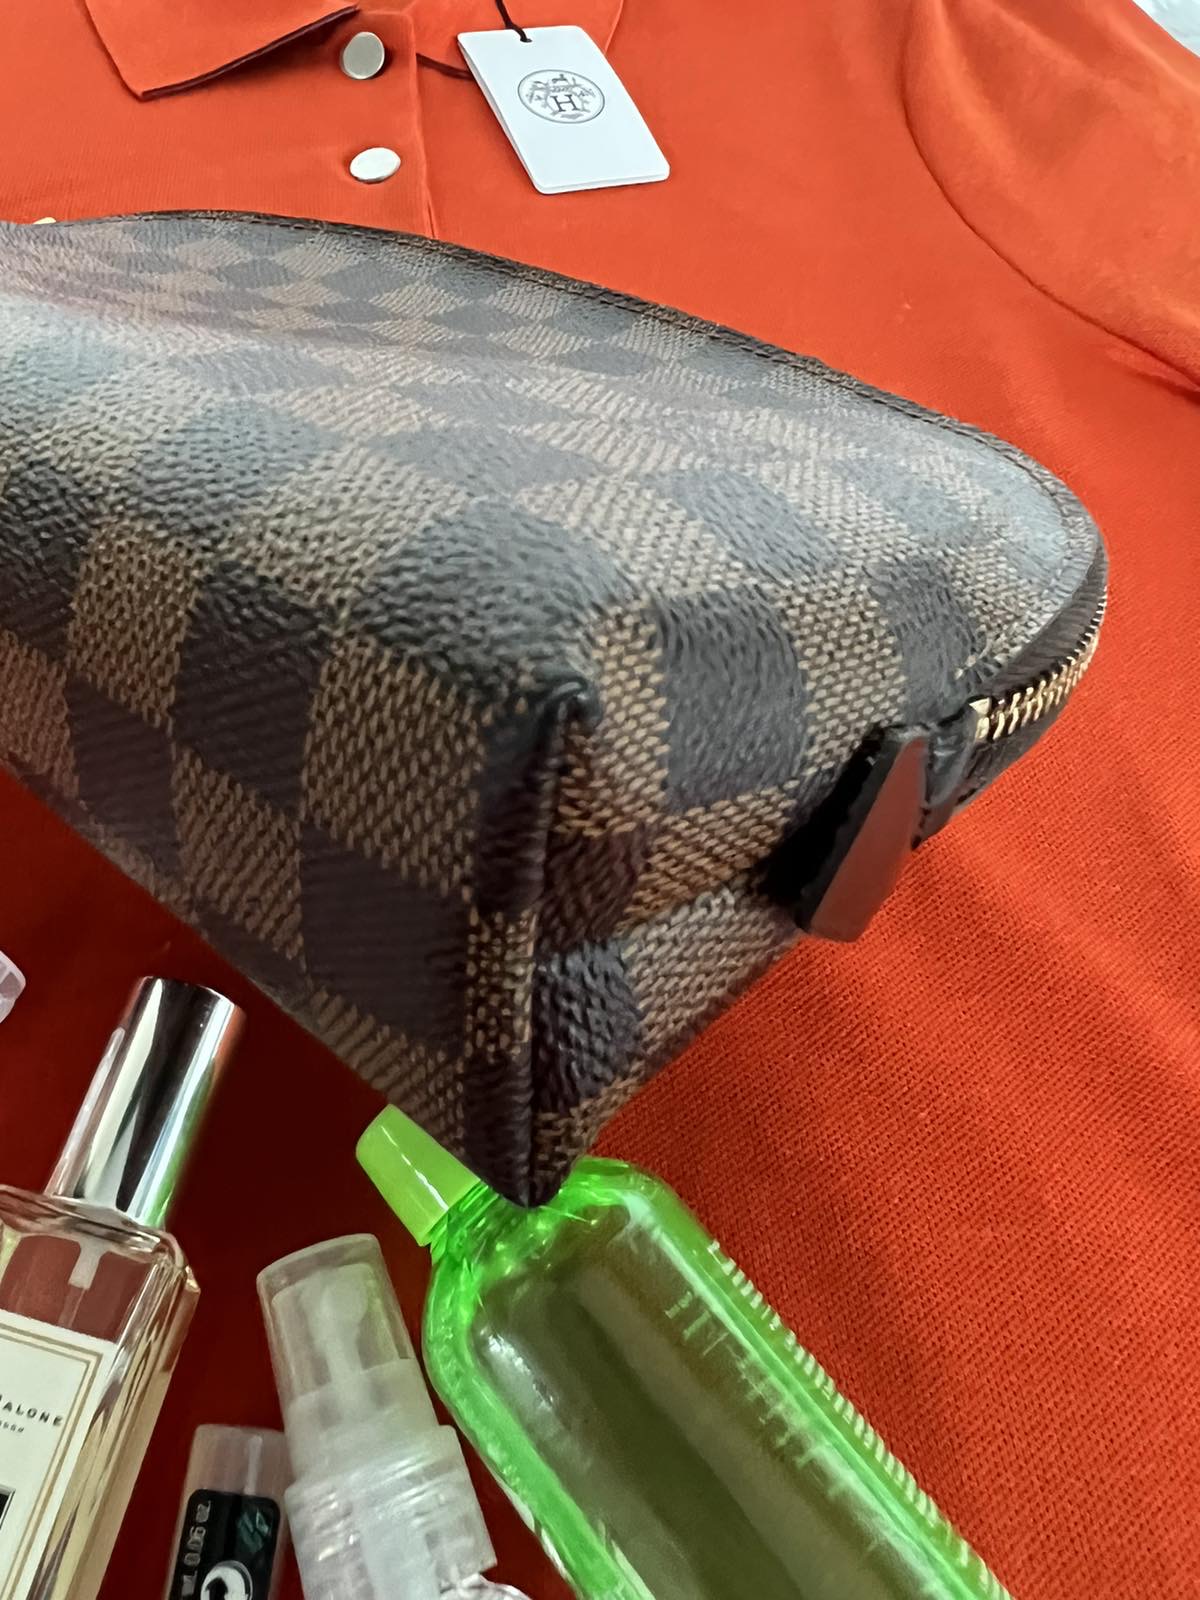 Louis Vuitton Damier Ebene Cosmetic Pouch PM at Jill's Consignment